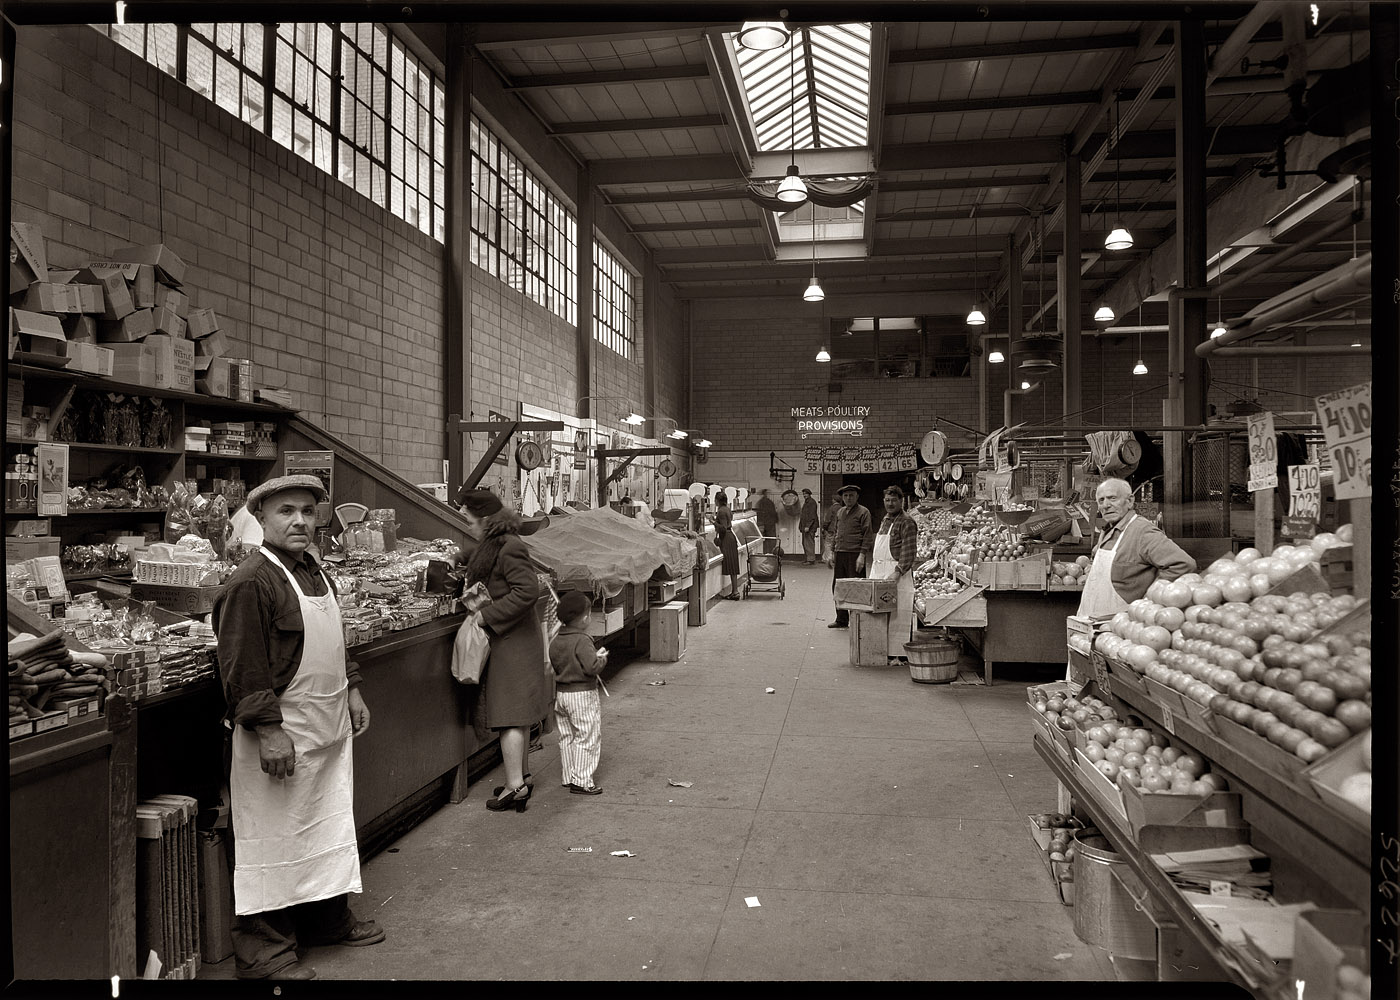 March 22, 1948. The New York City Public Market at First Avenue and East 73rd Street (?), an example of the food market in transition. A typical 19th-century market would have many separate vendors in an open-air space like a town square. By the early 1900s the open-air space had given way to separate vendors under a large shed roof with no walls, often near the train station. Here in 1948 the space is enclosed, but still with separate vendors (greengrocer, butcher, dry goods, fishmonger etc.). After the  introduction of centralized distribution and self-service for the various product categories, the individual vendors fade from the scene and the market has a new name: "super-market," now spelled without the hyphen. View full size. 5x7 safety negative by Gottscho-Schleisner.